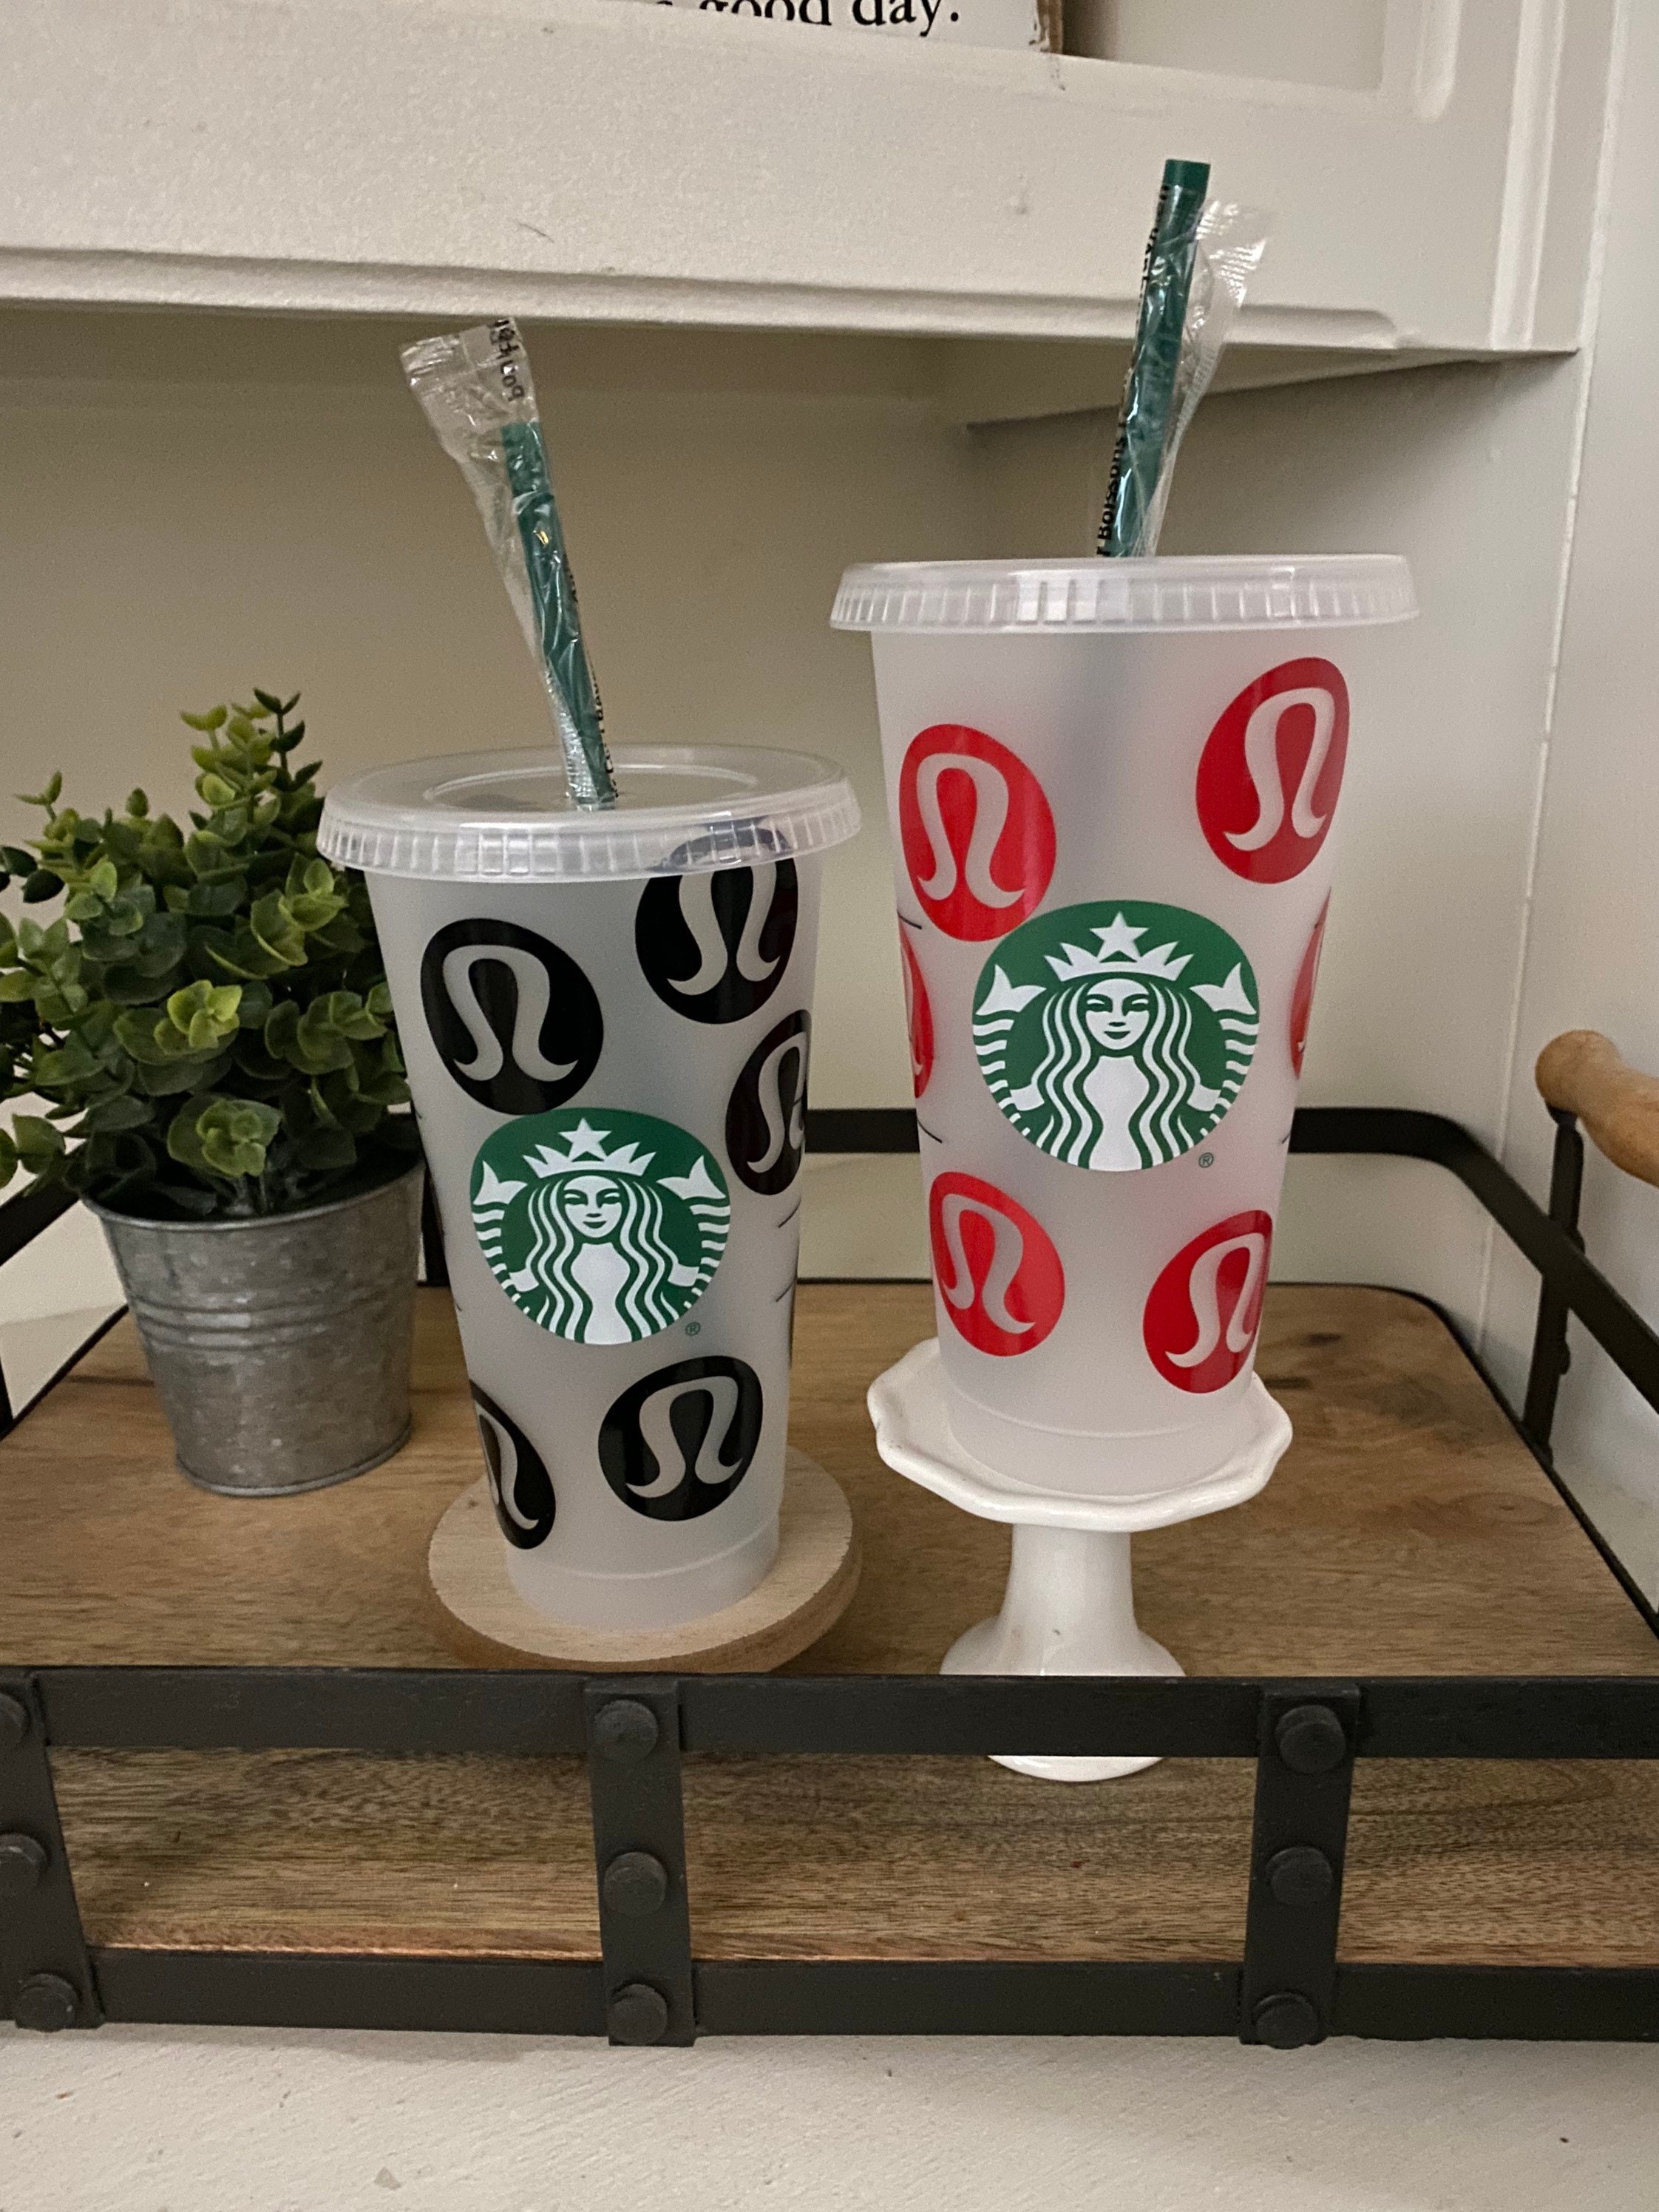 Starbucks Welcomes Back Personal Reusable Cups and Highlights